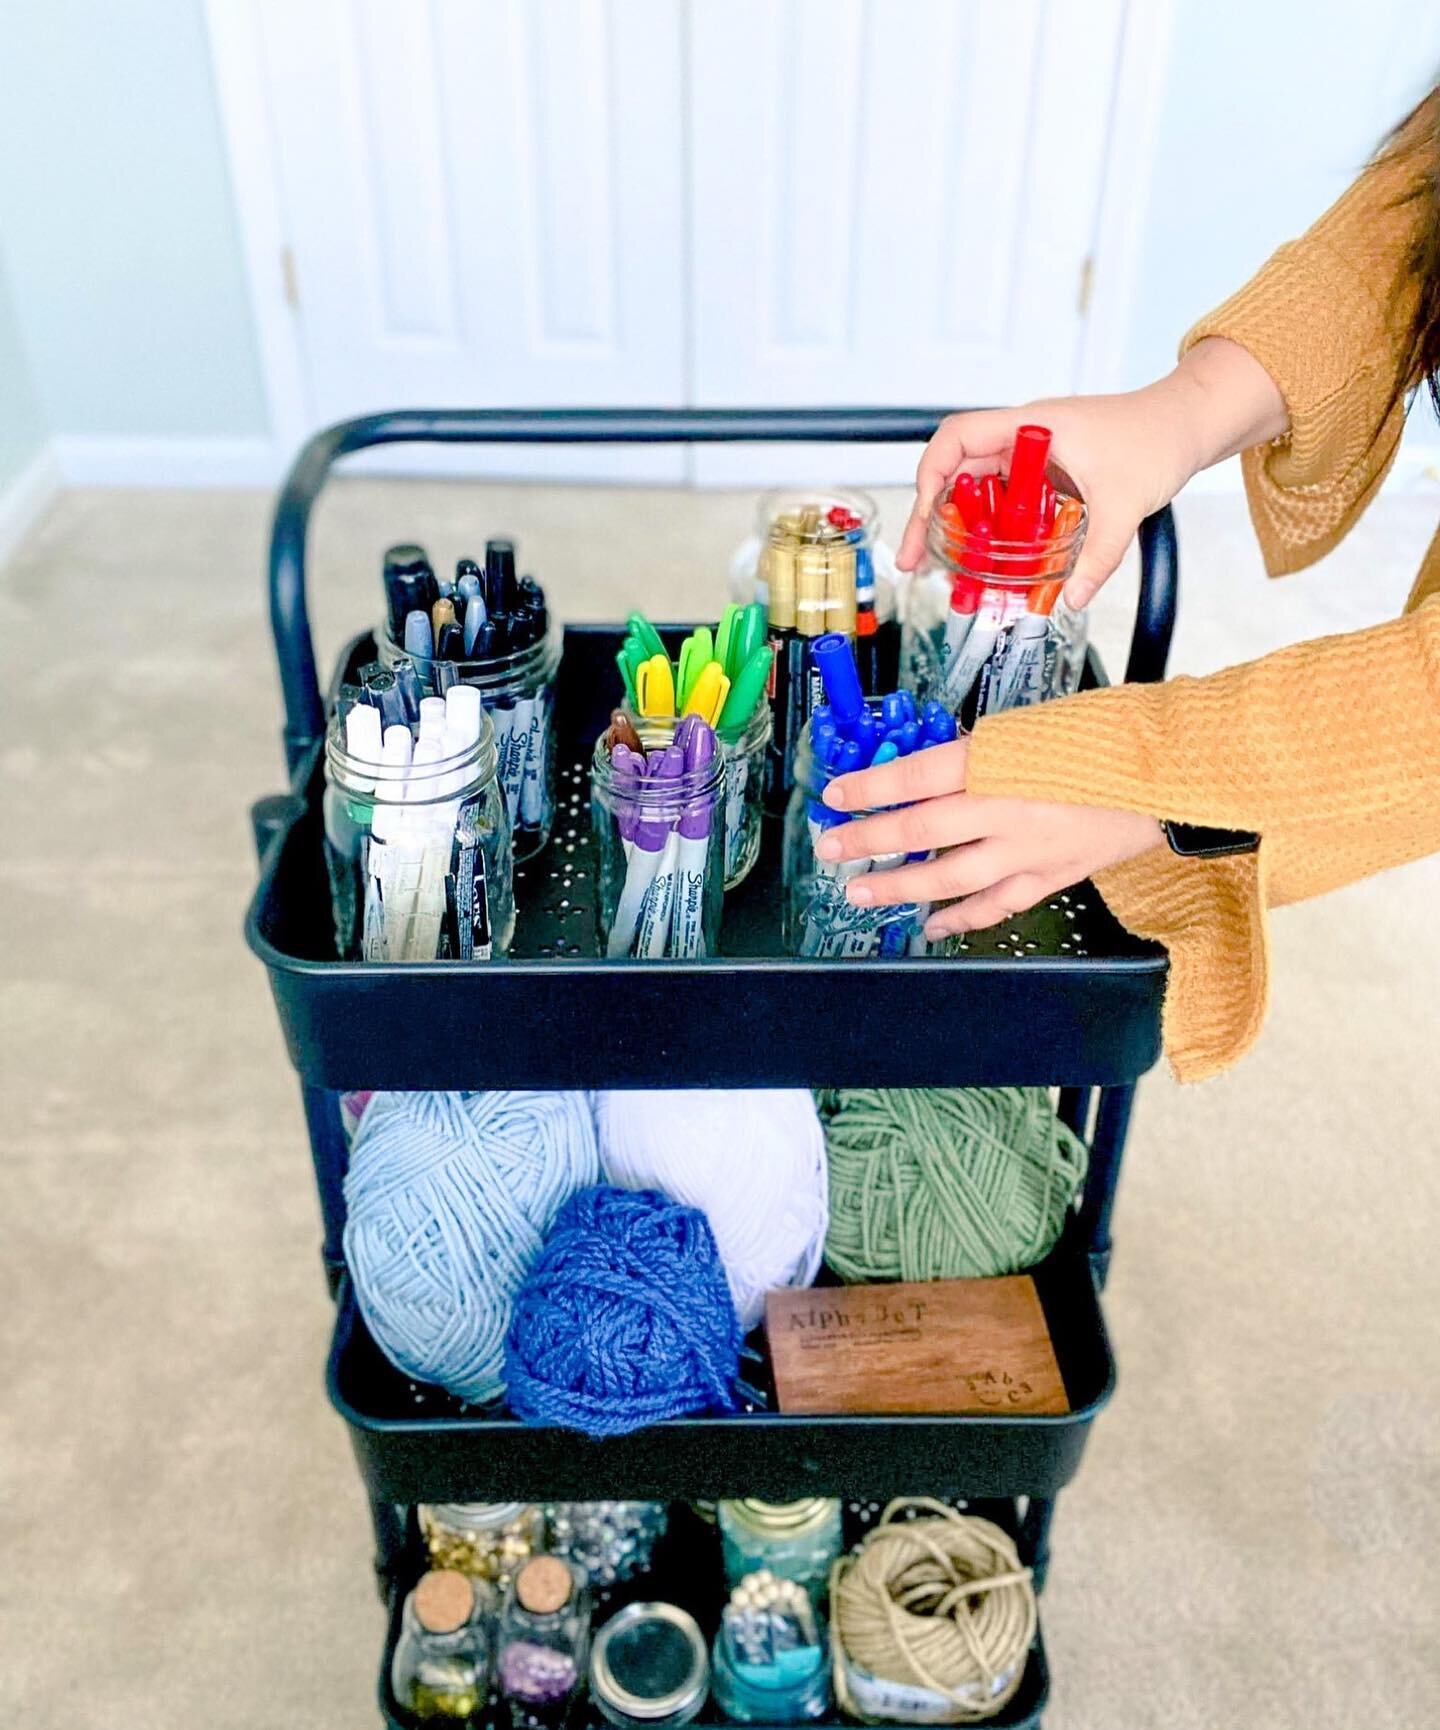 🌸 Mother's Day Gift Guide 🌸
Today's Gift Idea: A Metal Rolling Cart

This gift is perfect for every mom. It's at great price point and affordable for anyone's budget. Plus it&rsquo;s adaptable to anyone&rsquo;s needs and interests. Does she love ba